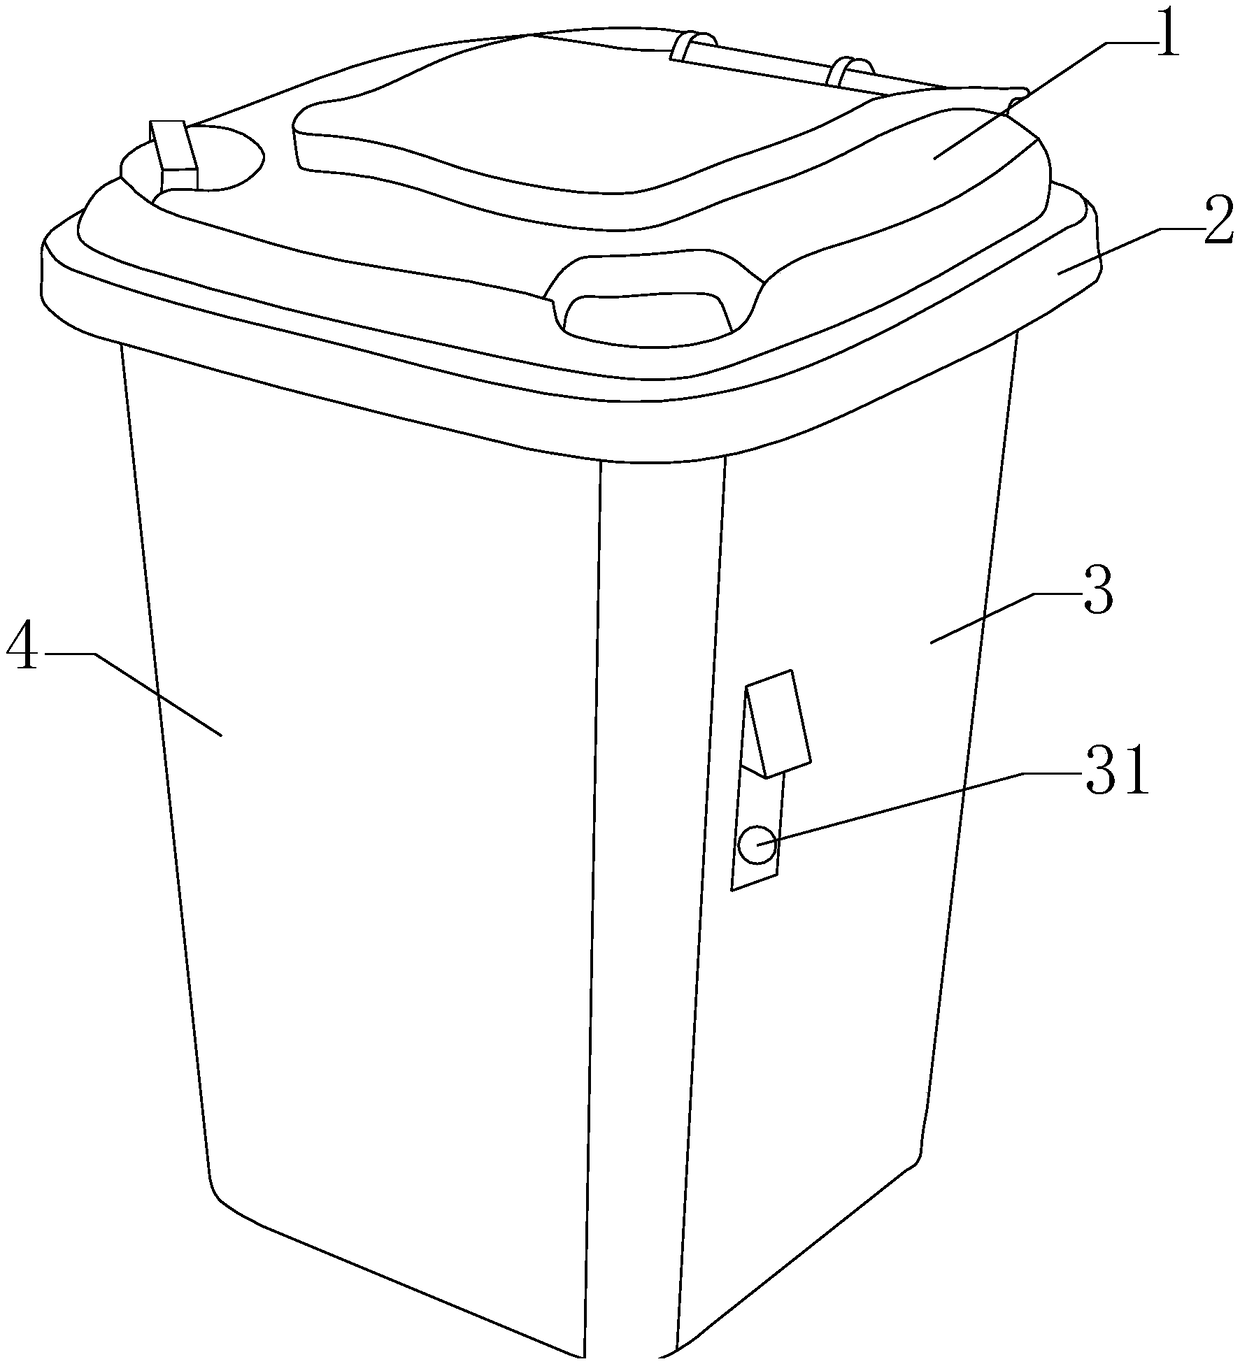 Municipal administration garbage can based on inner adsorption in field of municipal administration environment protection